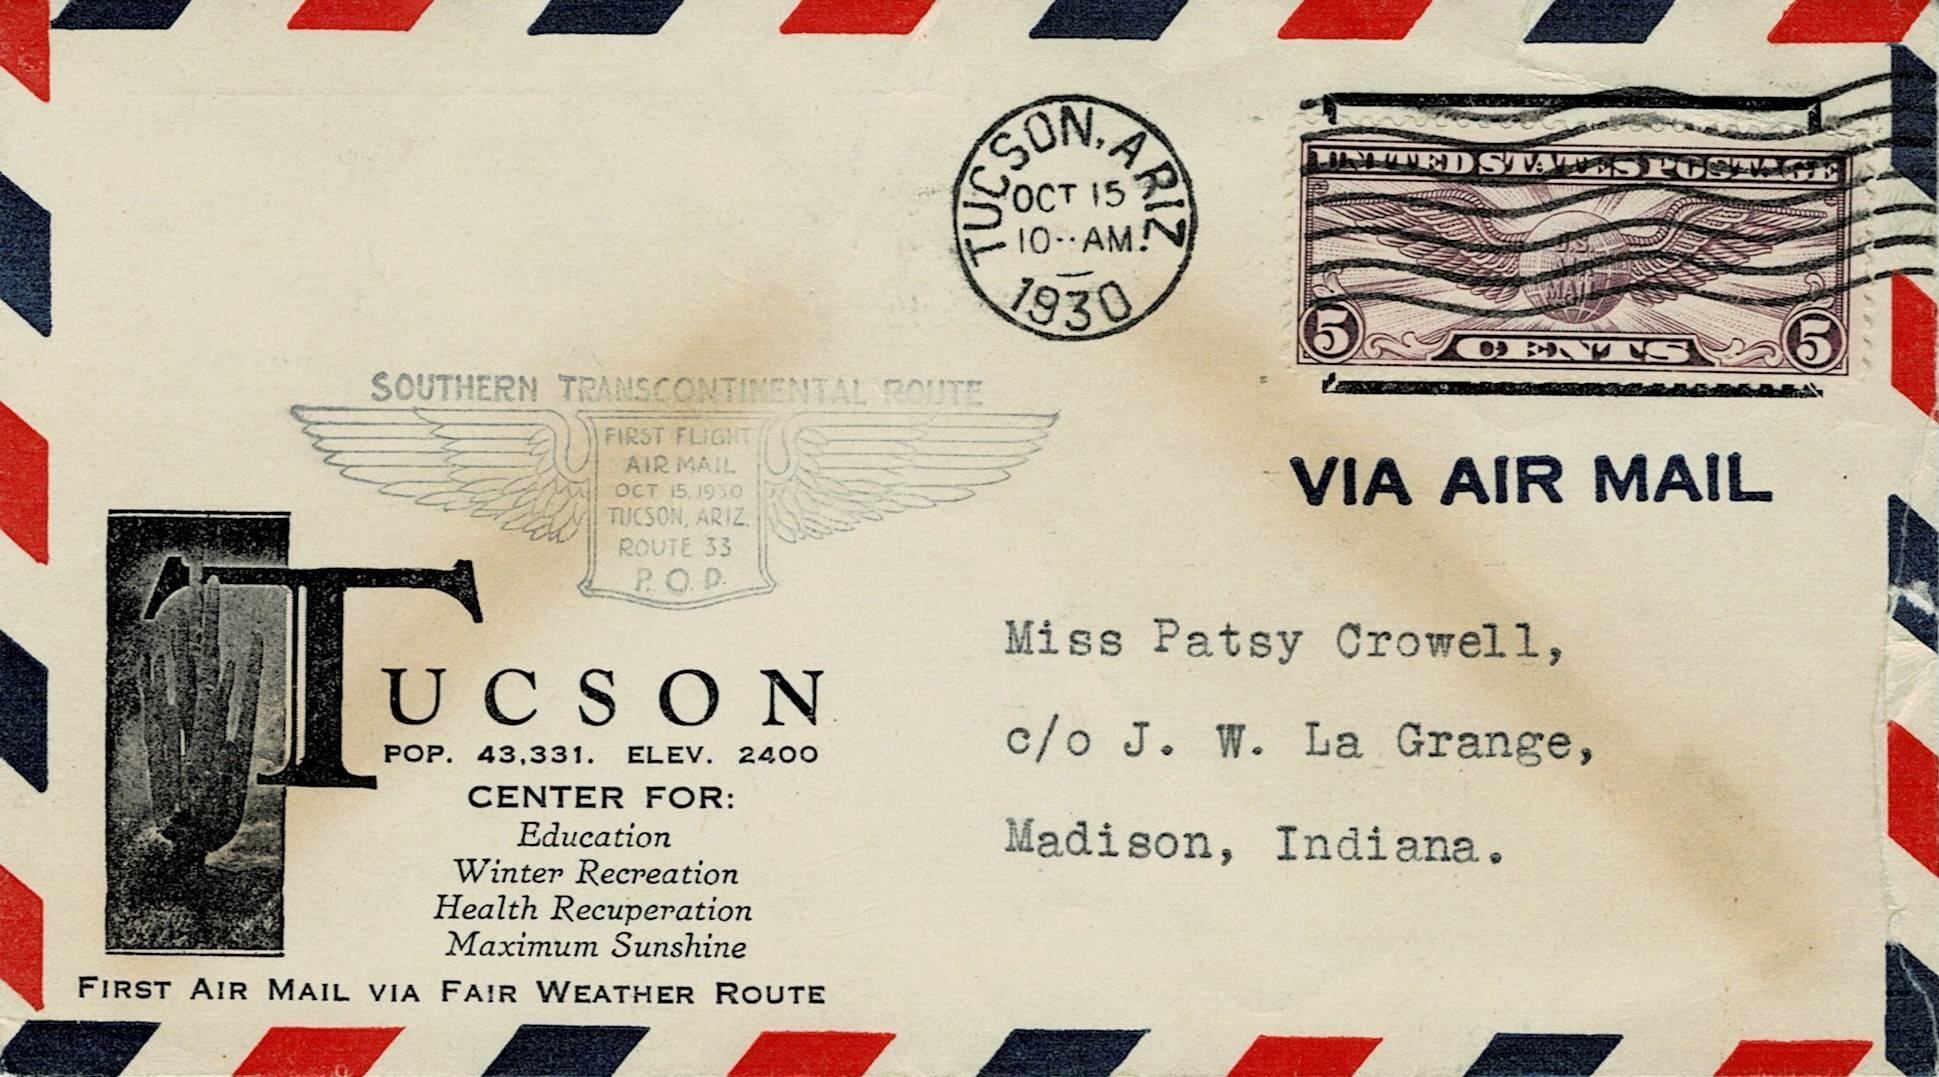 Southern Transcontinental Route First Air Mail October 15 1930 Tucson, Ariz Route 33 P.O.D.